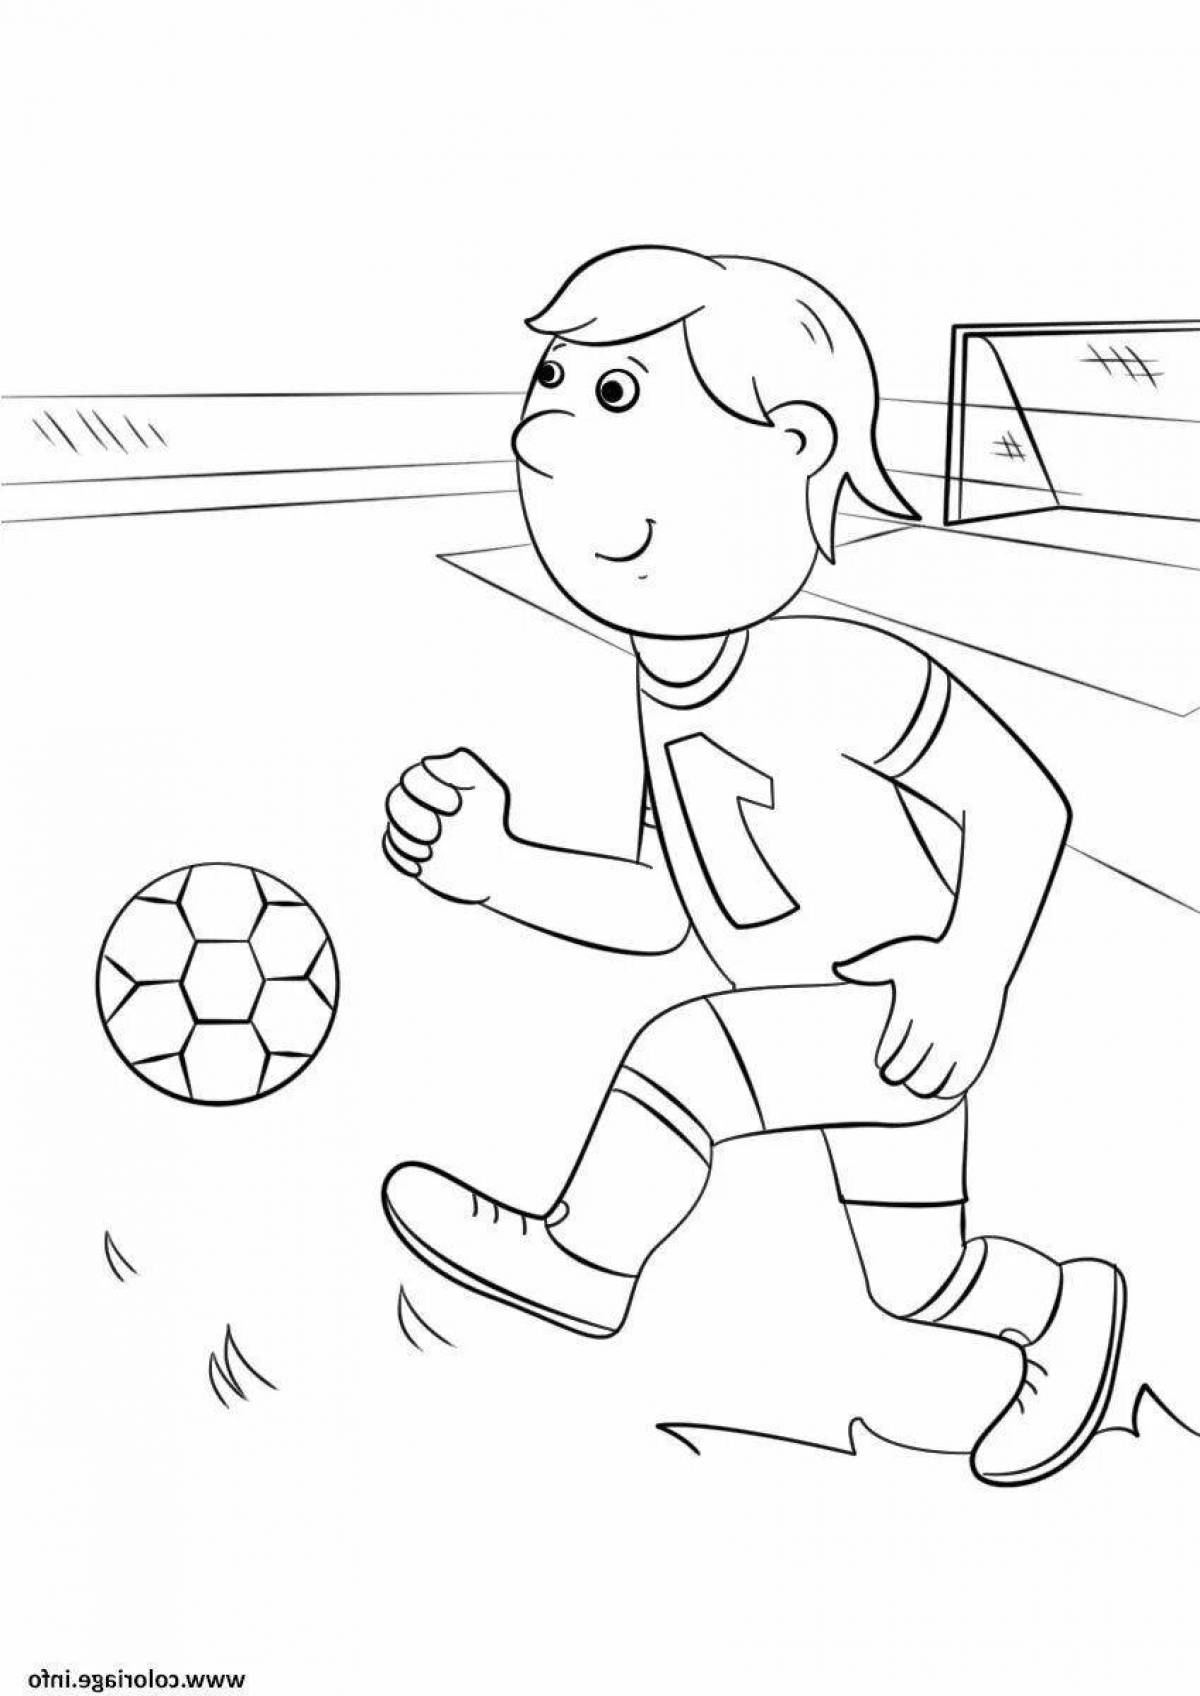 Amazing soccer player coloring page for kids